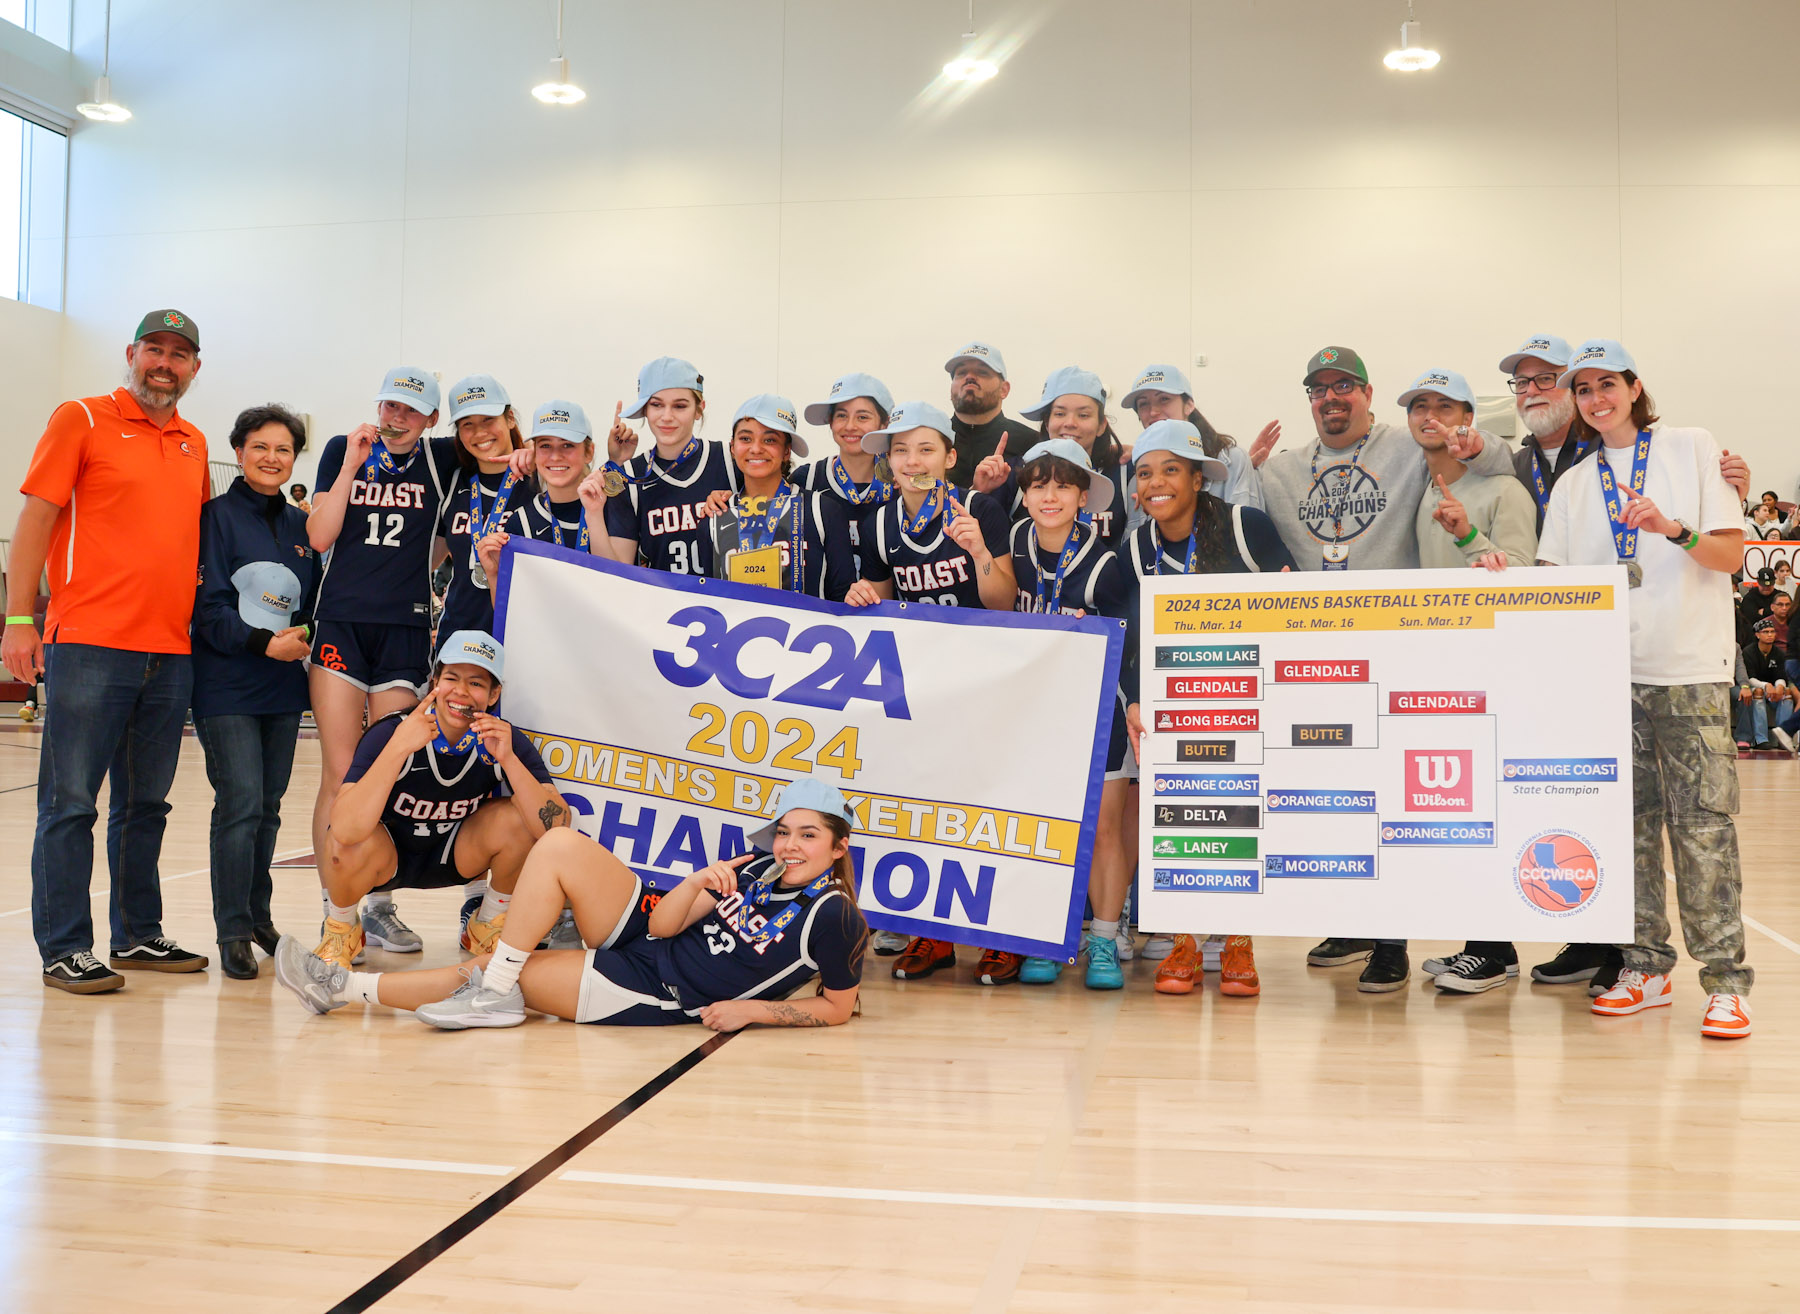 Orange Coast College repeat as women's basketball state champions (photo by Richard Quinton).